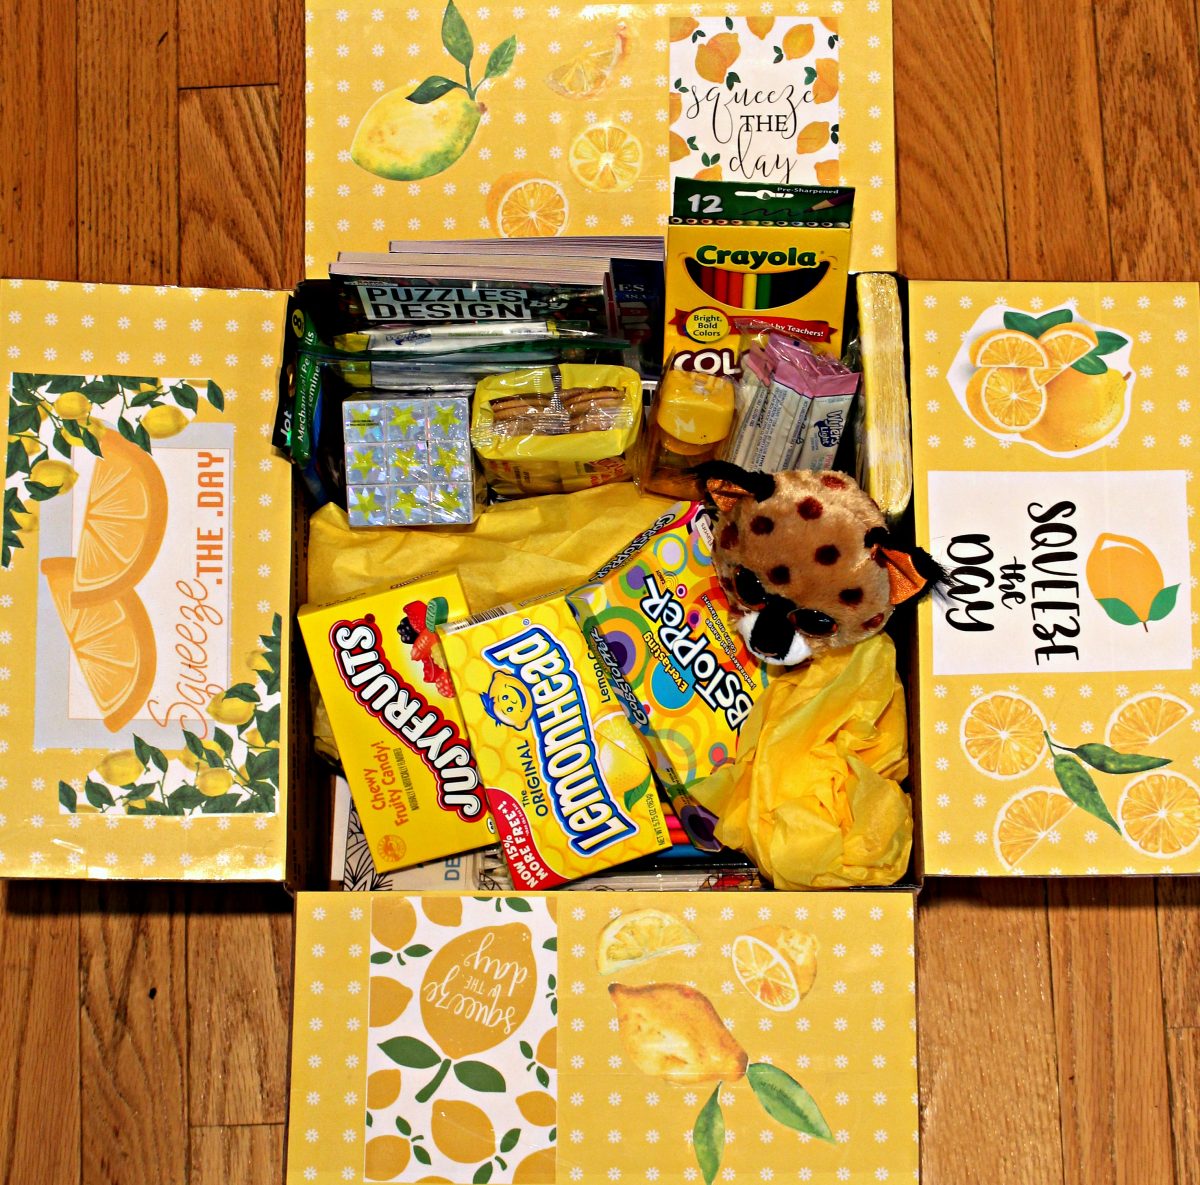 Care package with flaps decorated with yellow and white polka dots,lemons, and "squeeze the day" .